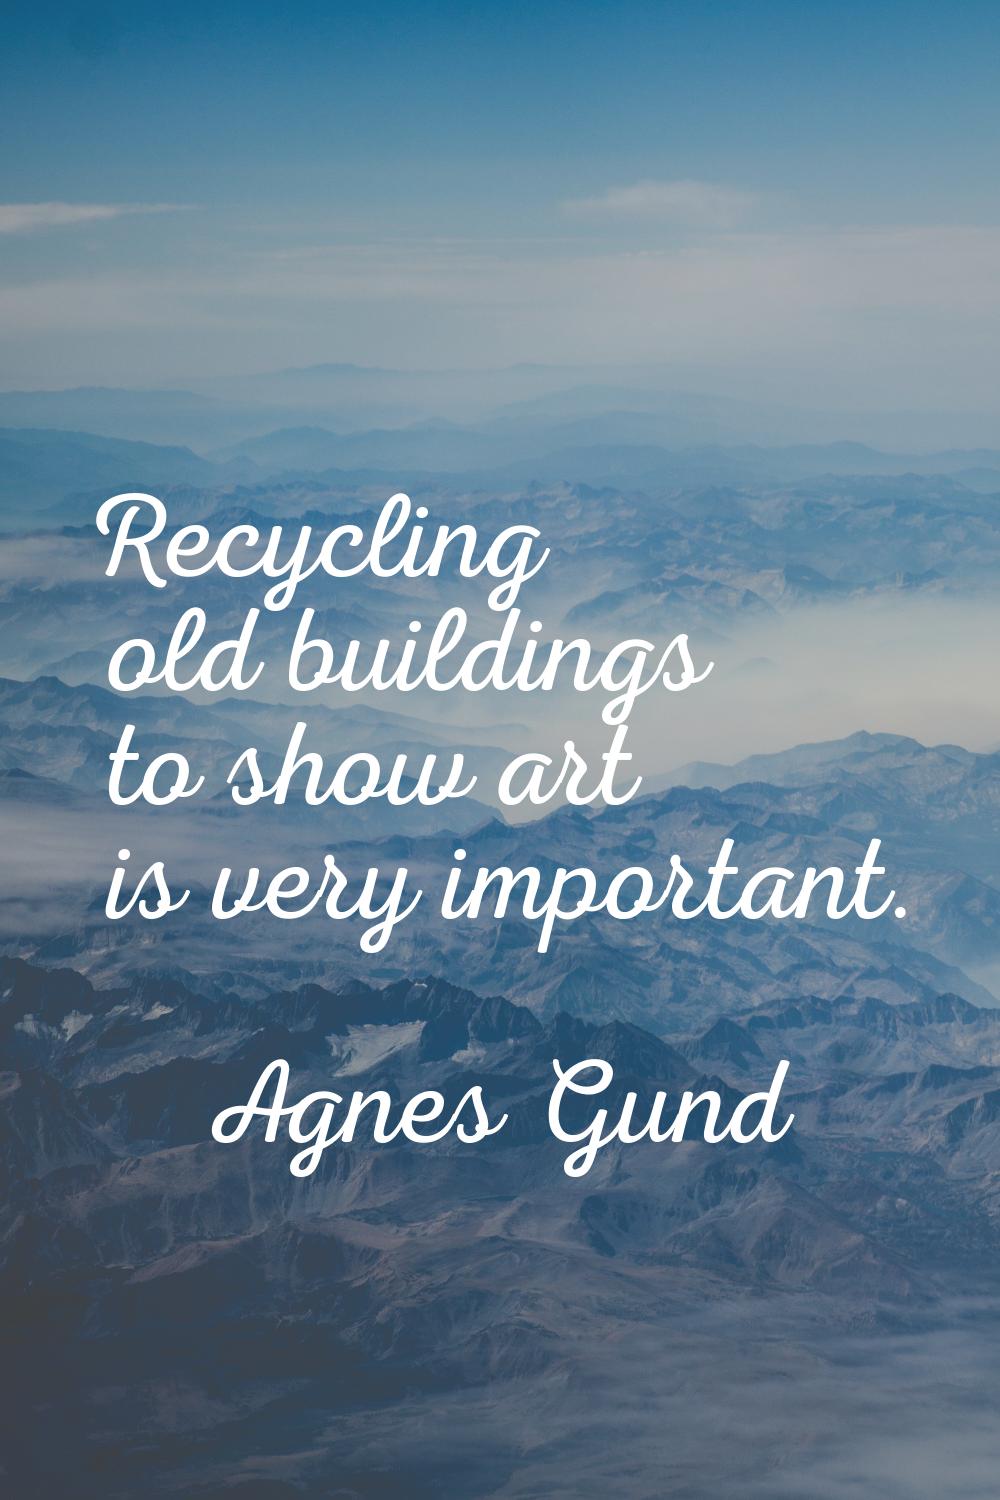 Recycling old buildings to show art is very important.